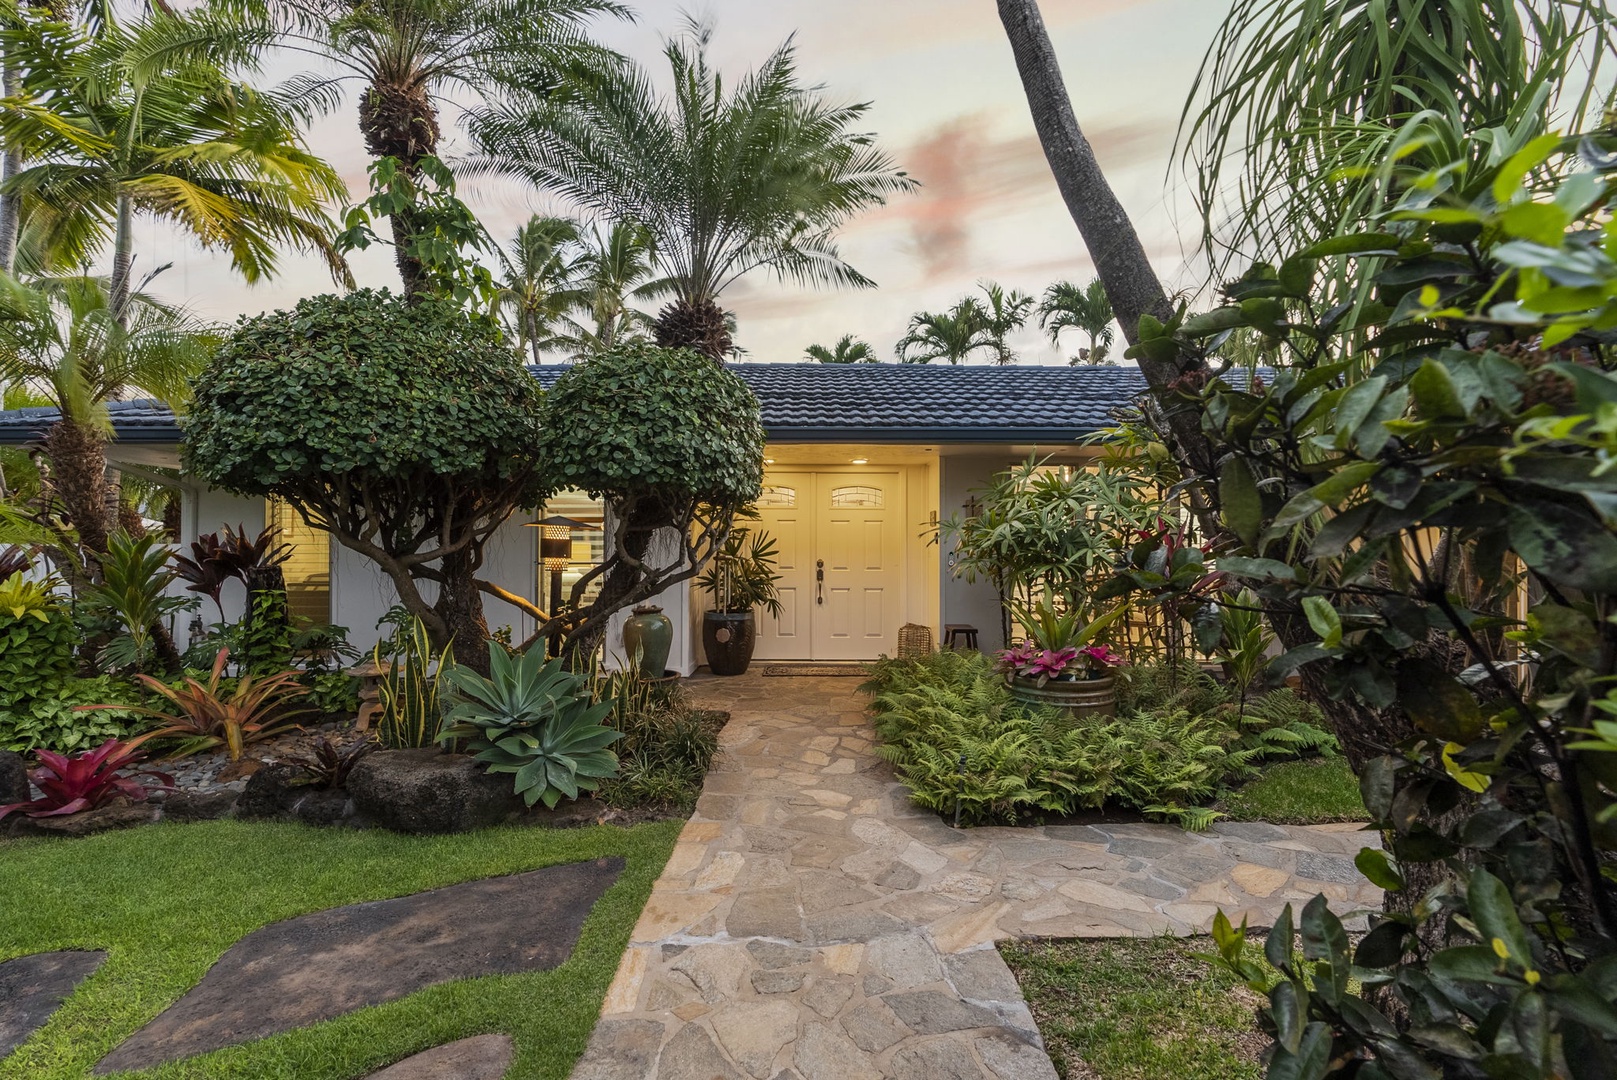 Kailua Vacation Rentals, Hale Aloha - Welcome home! Your entryway for an unforgettable vacation.